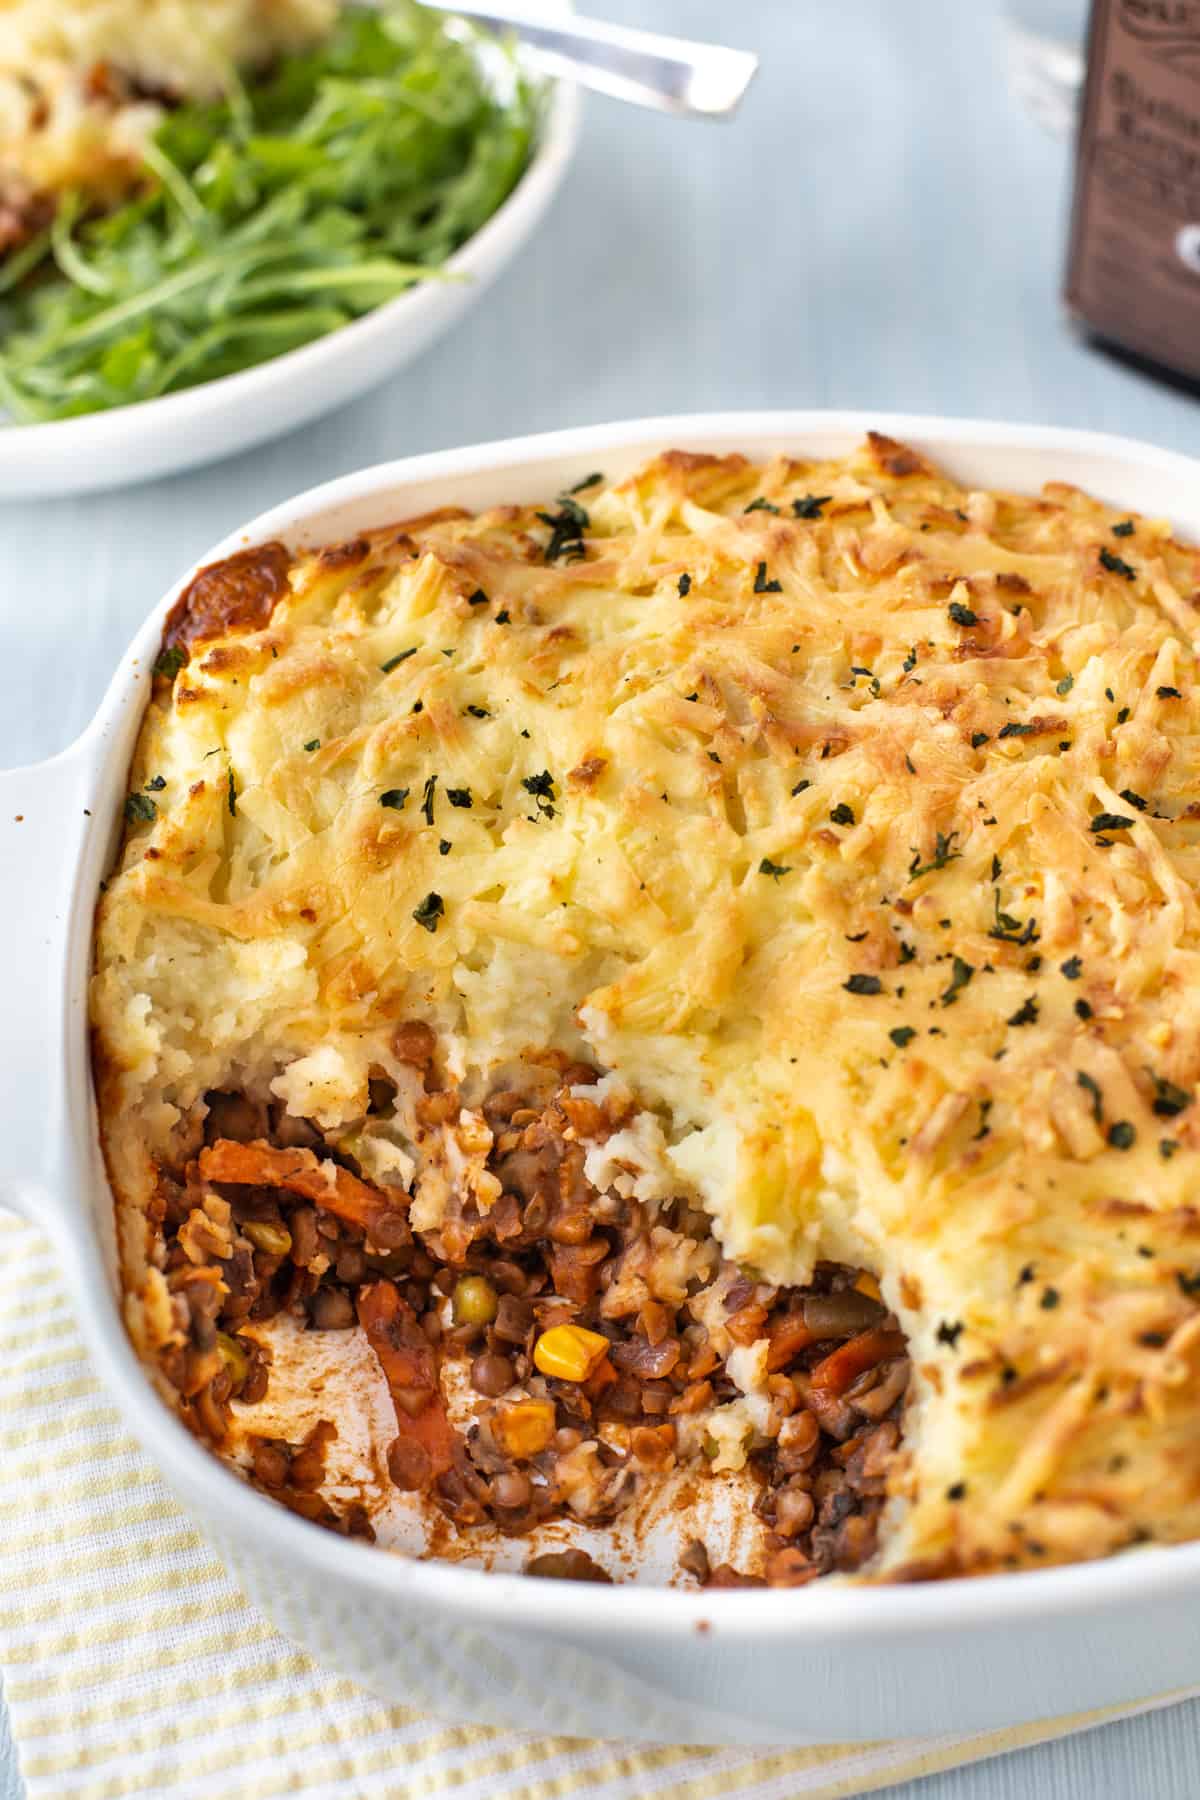 Vegetarian cottage pie in a dish with a large scoop removed.